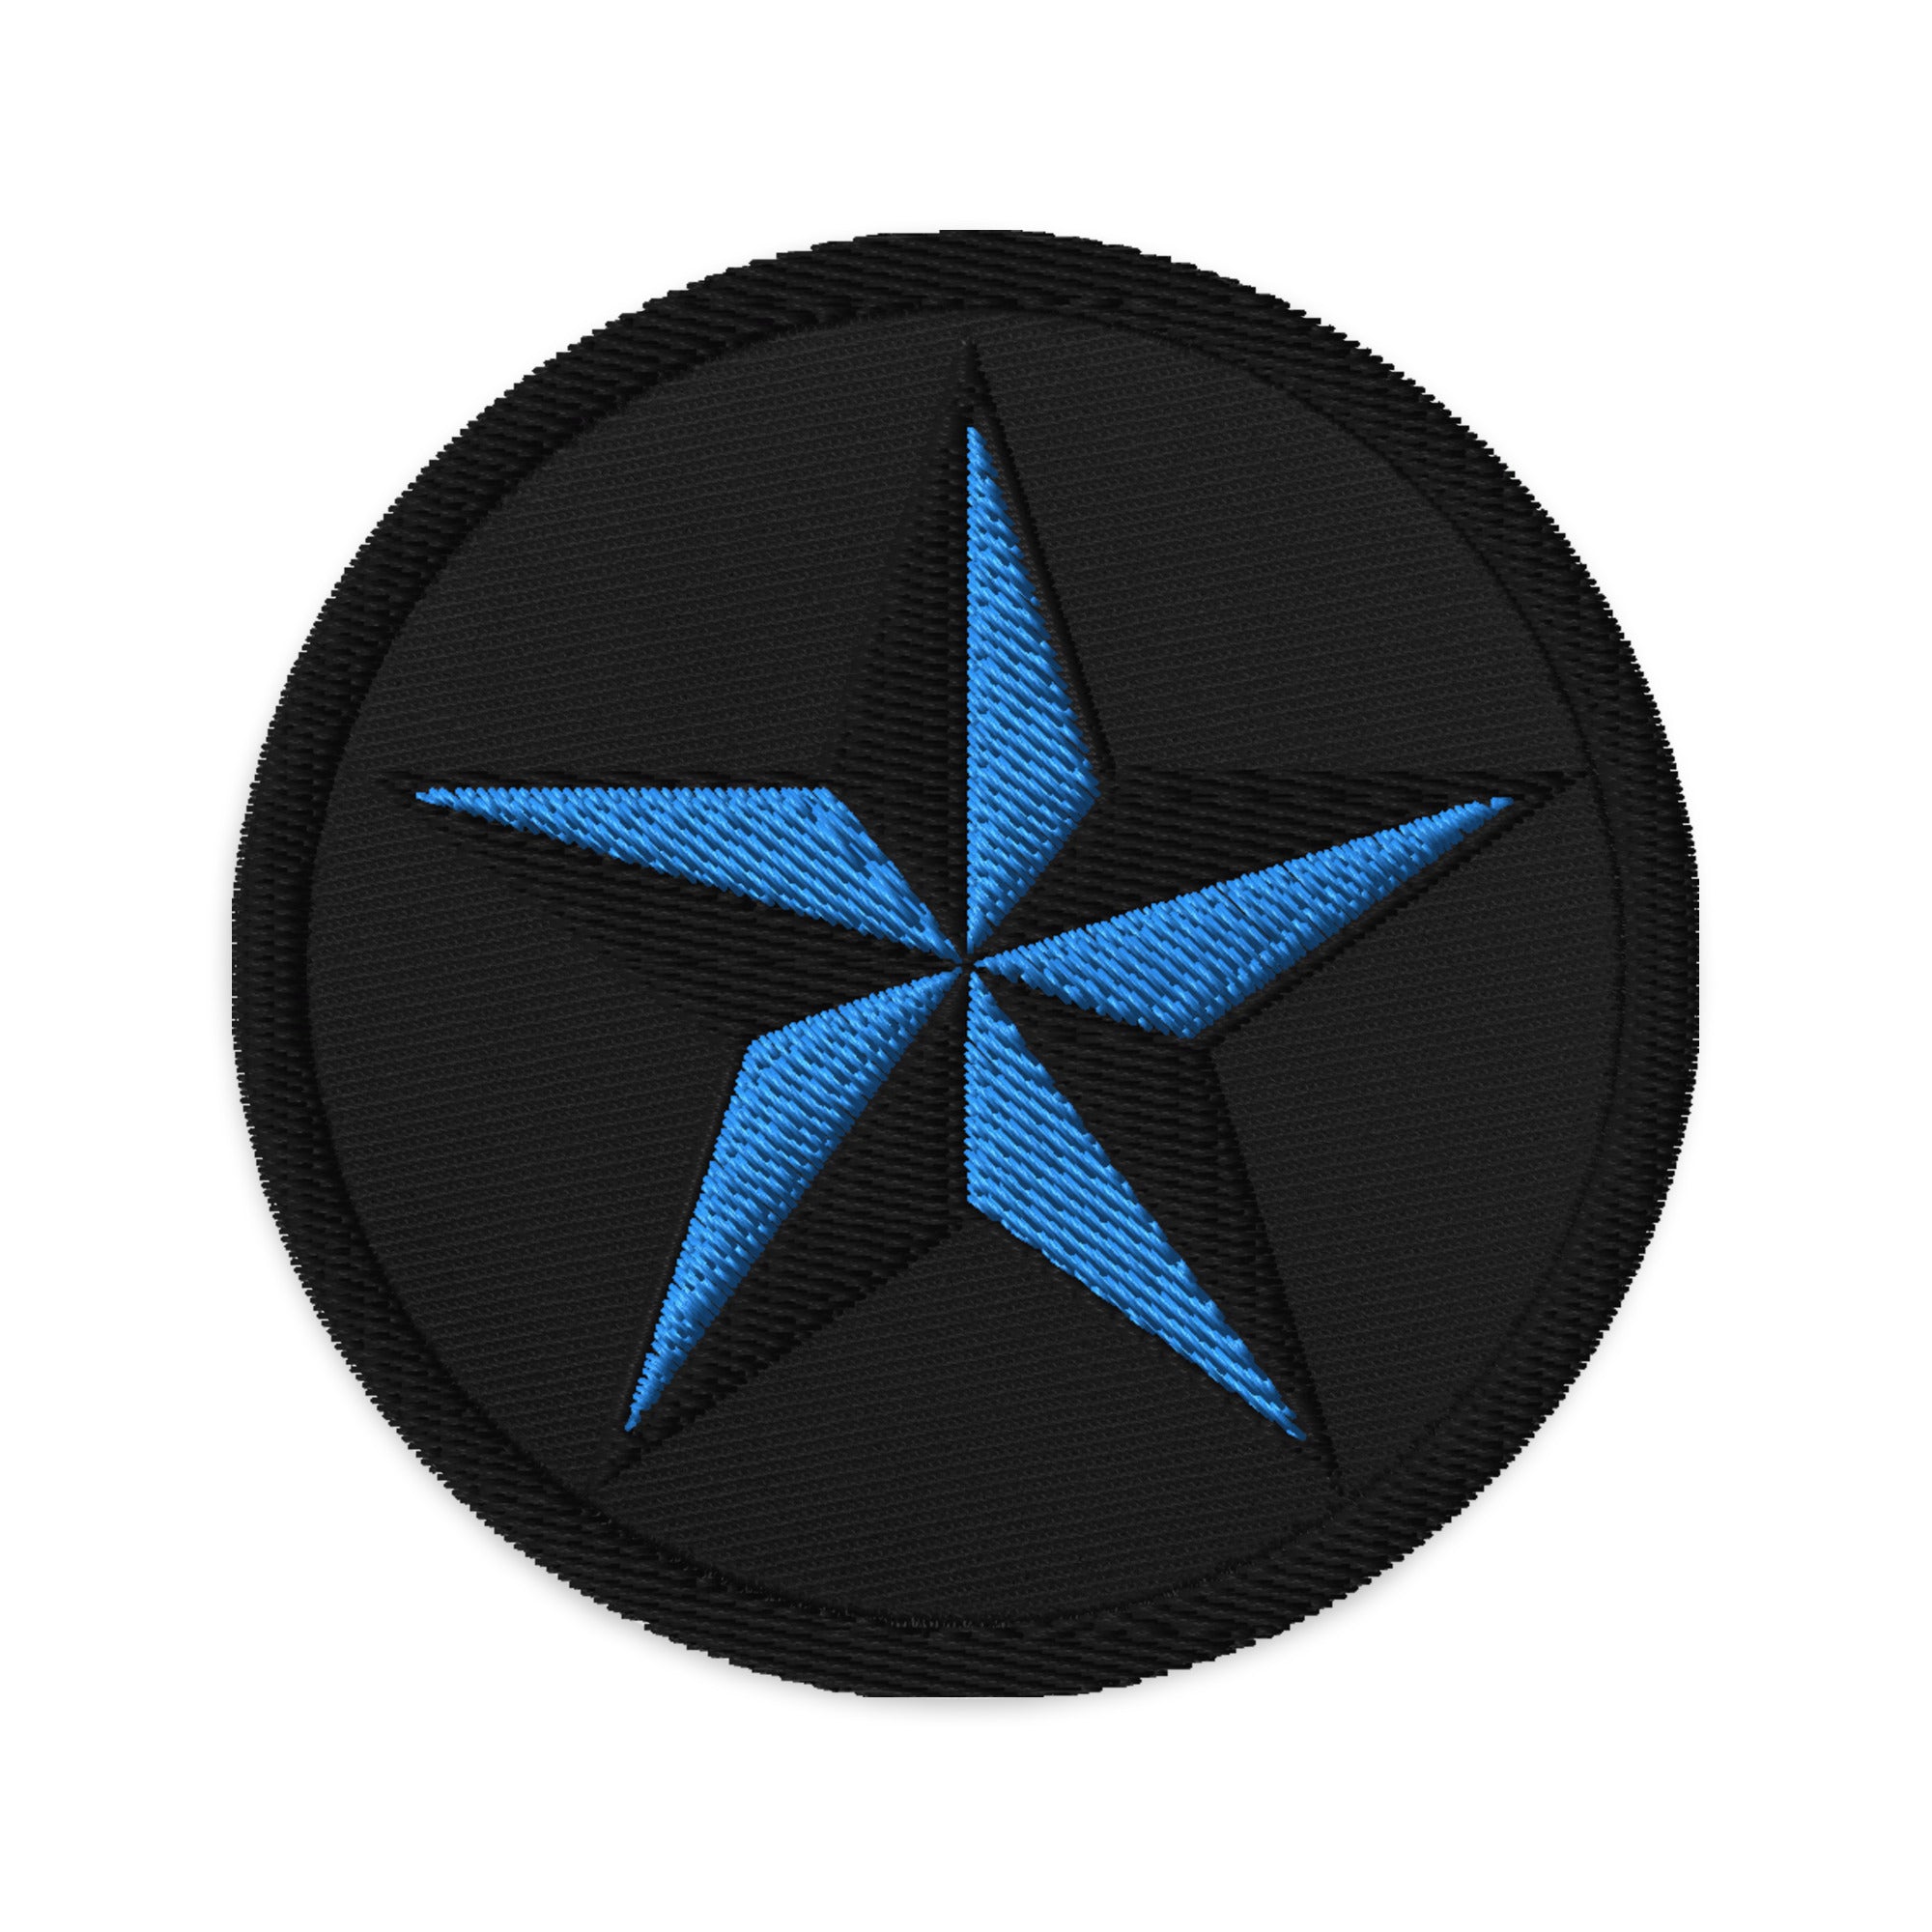 Nautical Star North Star Embroidered Patch Blue / Black Thread - Edge of Life Designs